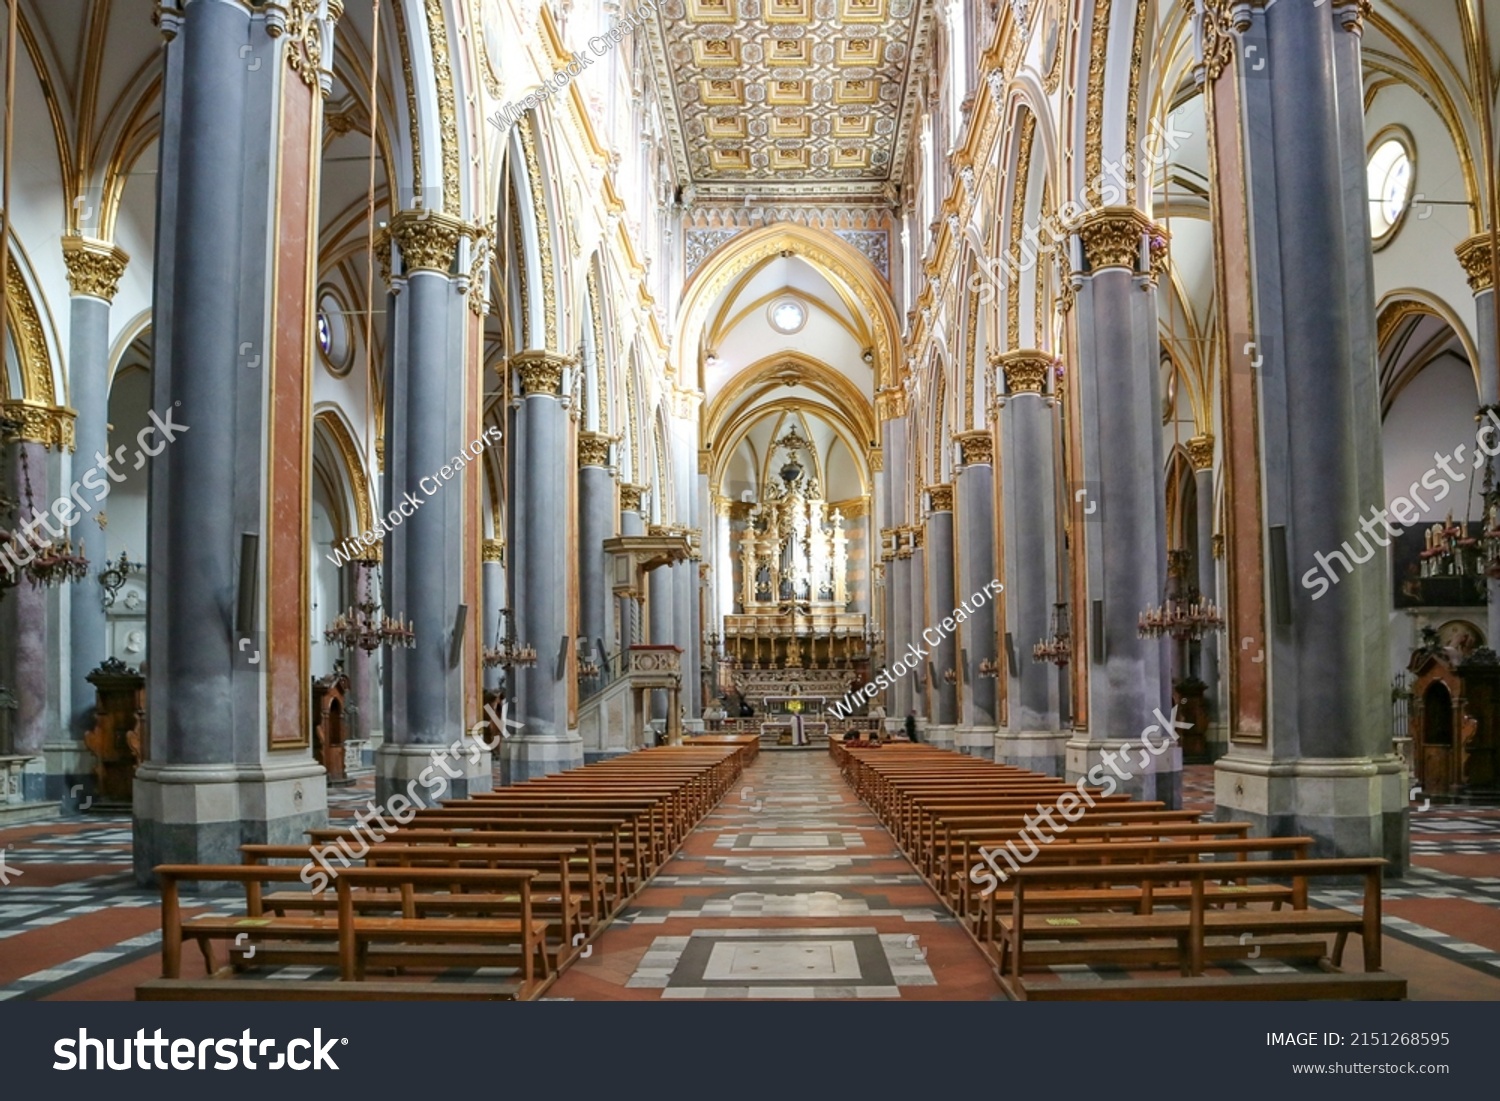 The interior of the church dedicated to Saint Dominic Major in Naples, Italy #2151268595